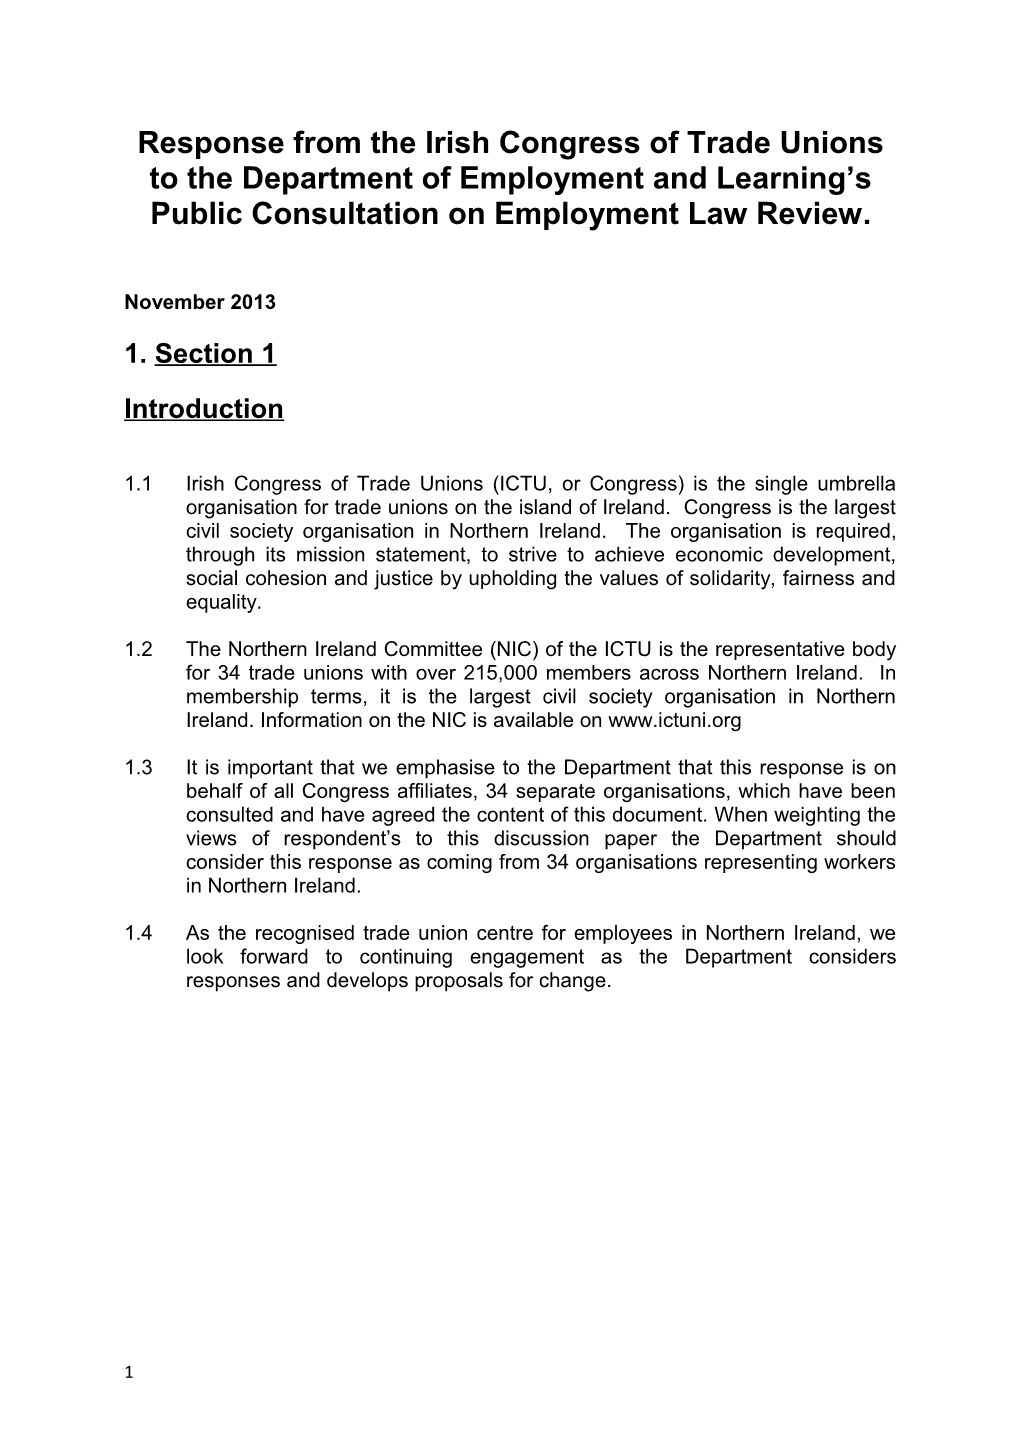 Response from the Irish Congress of Trade Unions to the Department of Employment and Learning